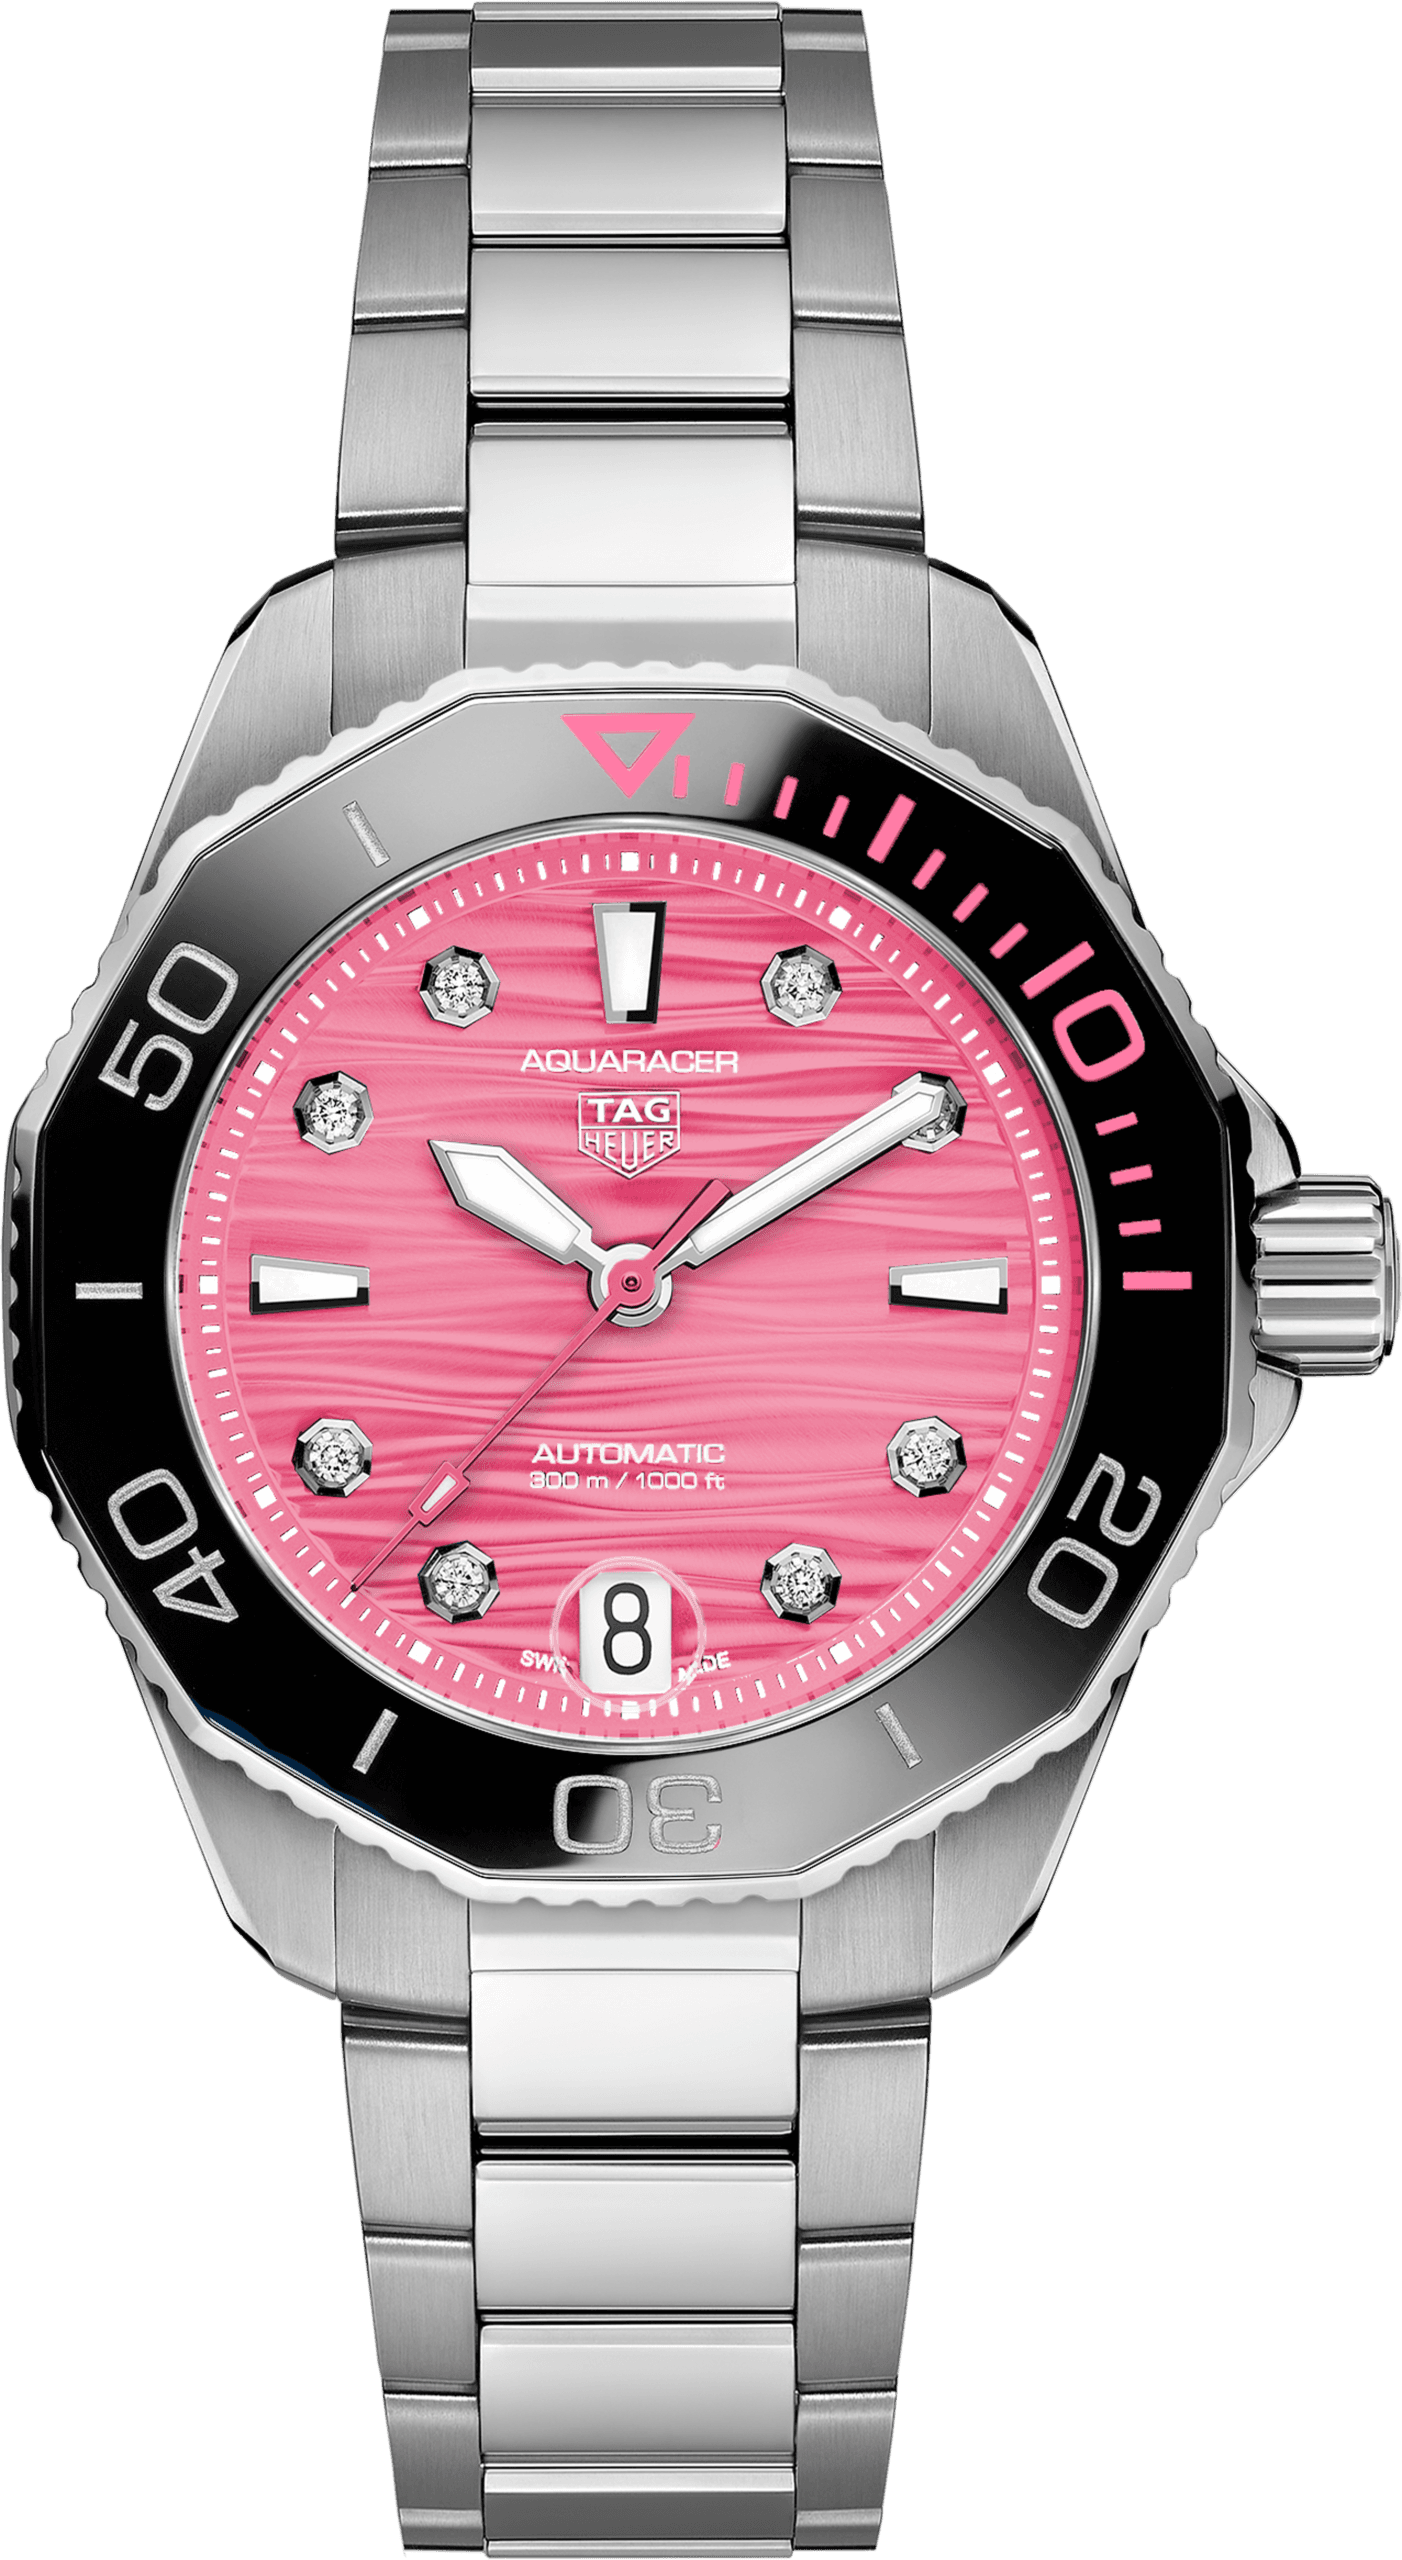 The Pink Dial Project